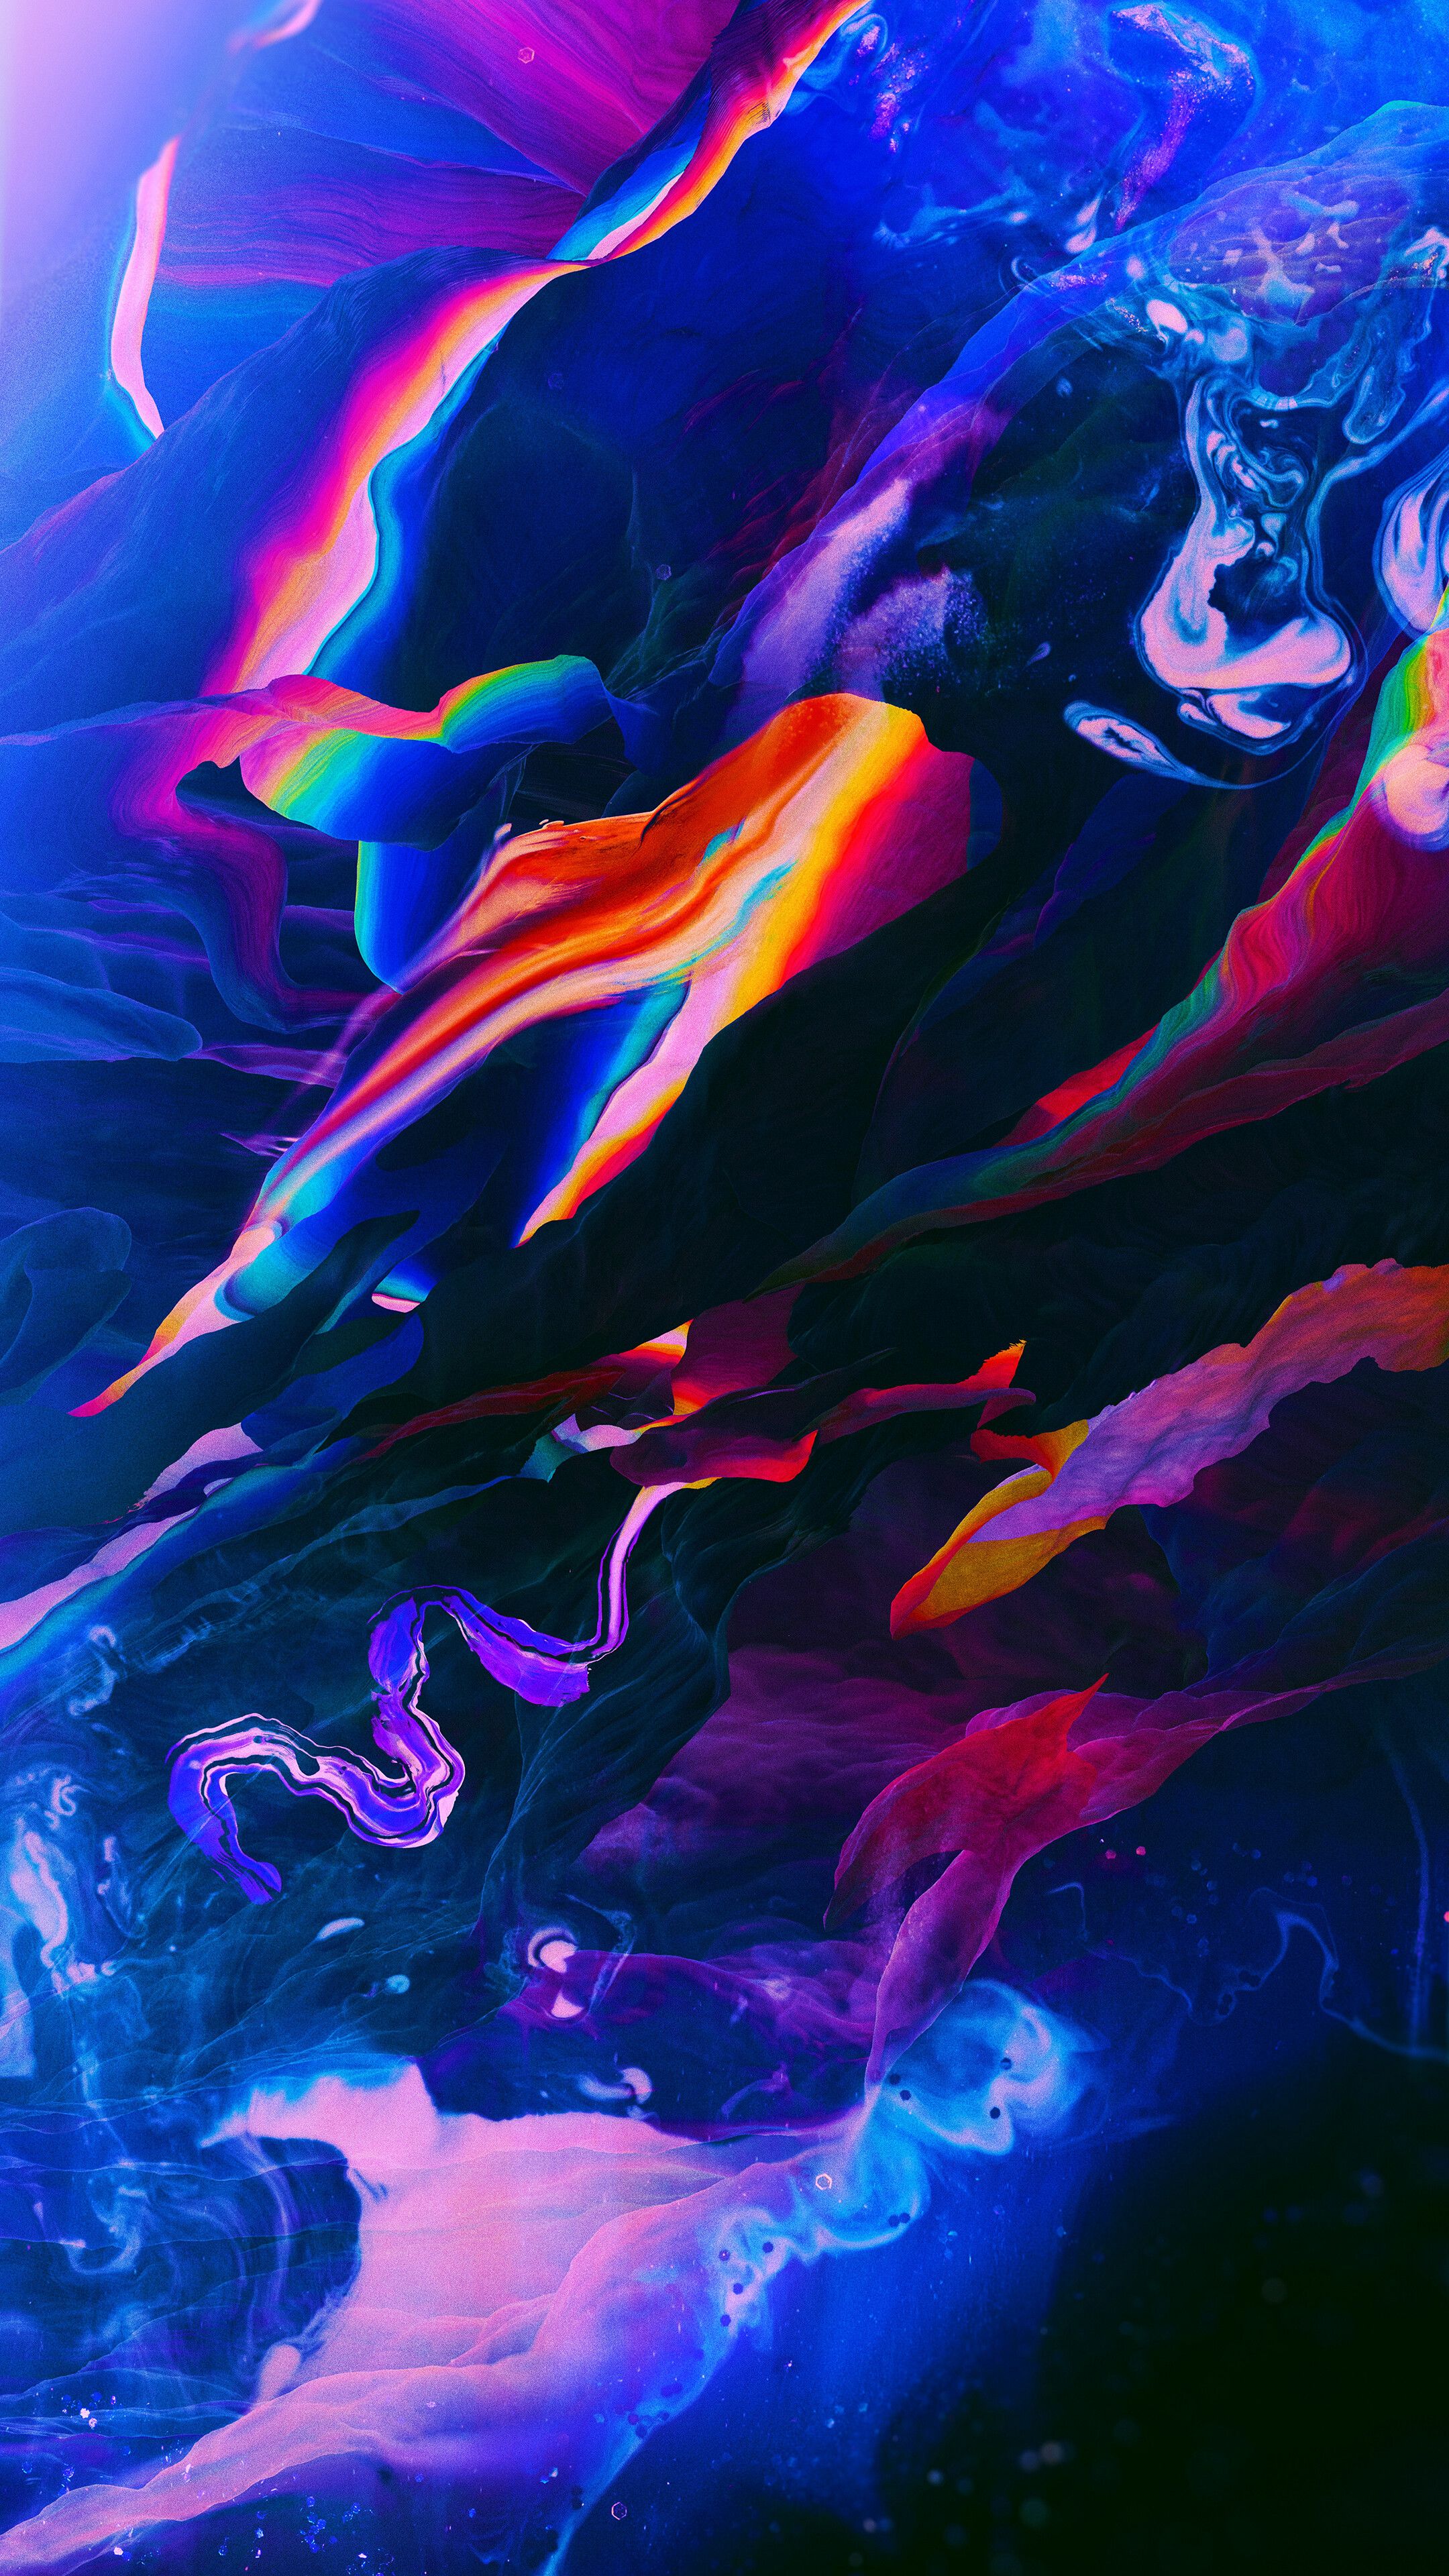 Colorful, Abstract, Digital Art phone HD Wallpaper, Image, Background, Photo and Picture. Mocah HD Wallpaper